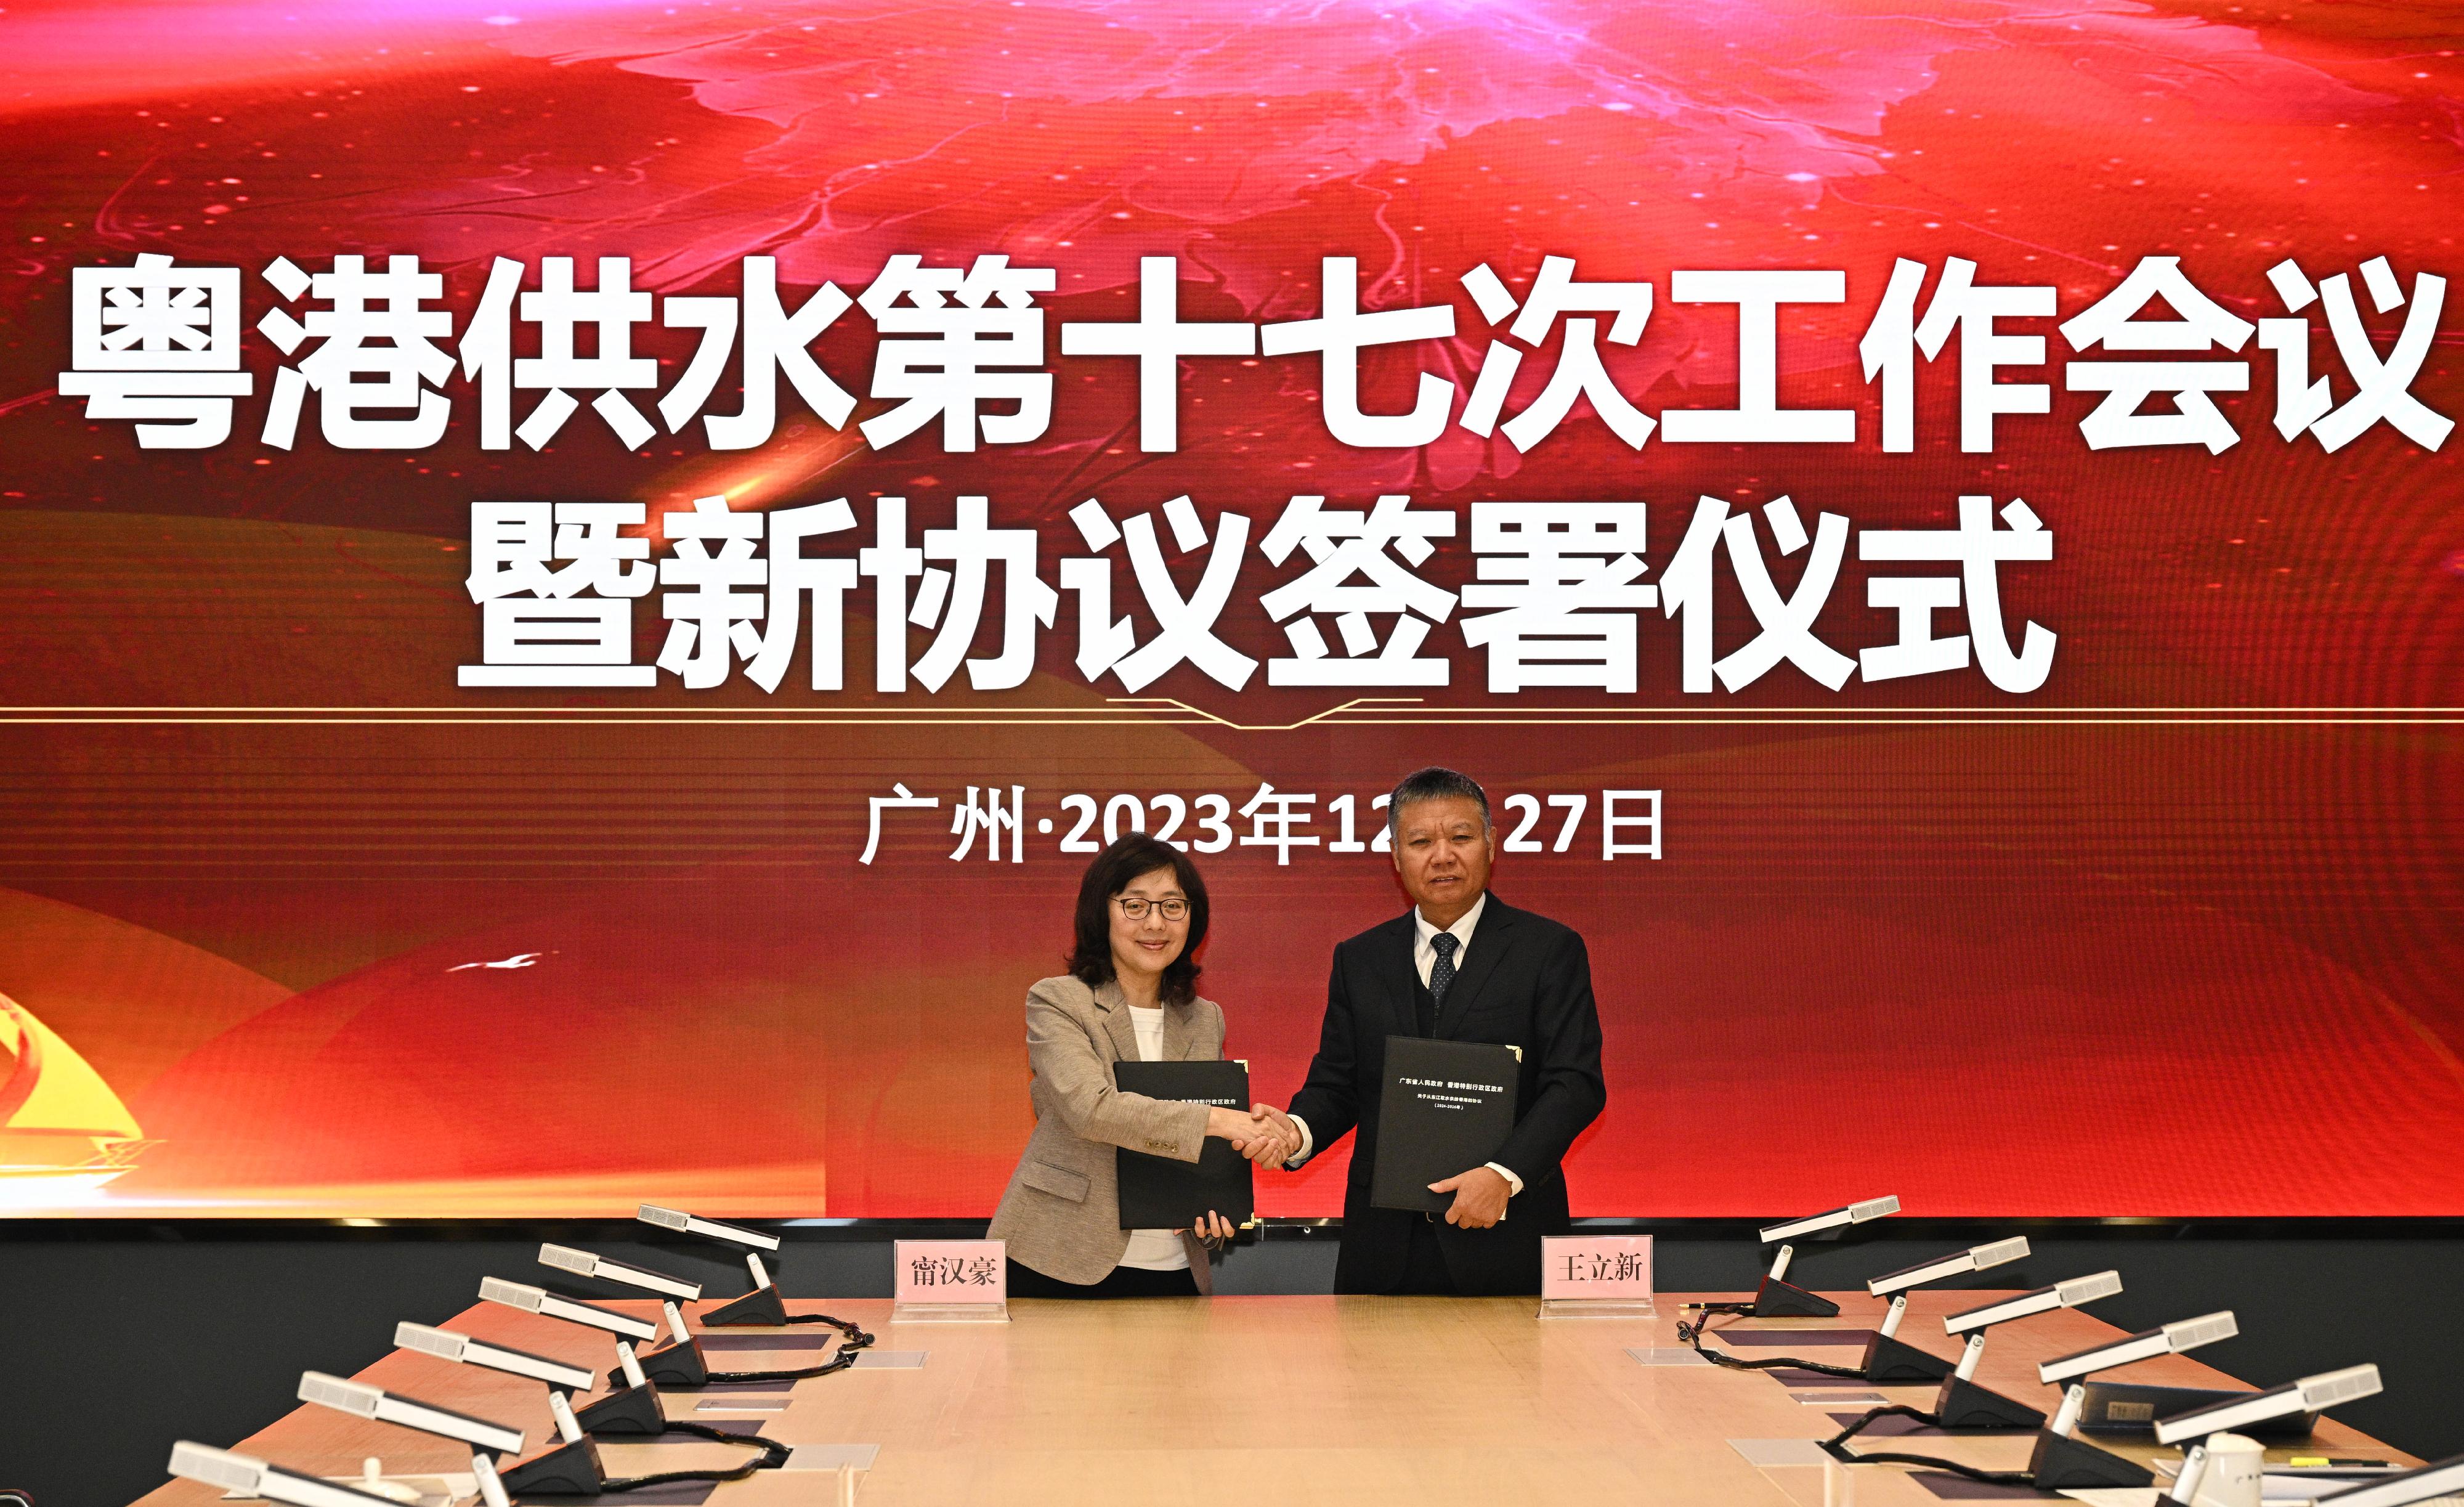 The Secretary for Development, Ms Bernadette Linn (left), signed a new agreement on the supply of Dongjiang water to Hong Kong from 2024 to 2026 with the Director General of the Water Resources Department of Guangdong Province, Mr Wang Lixin (right), in Guangzhou today (December 27).